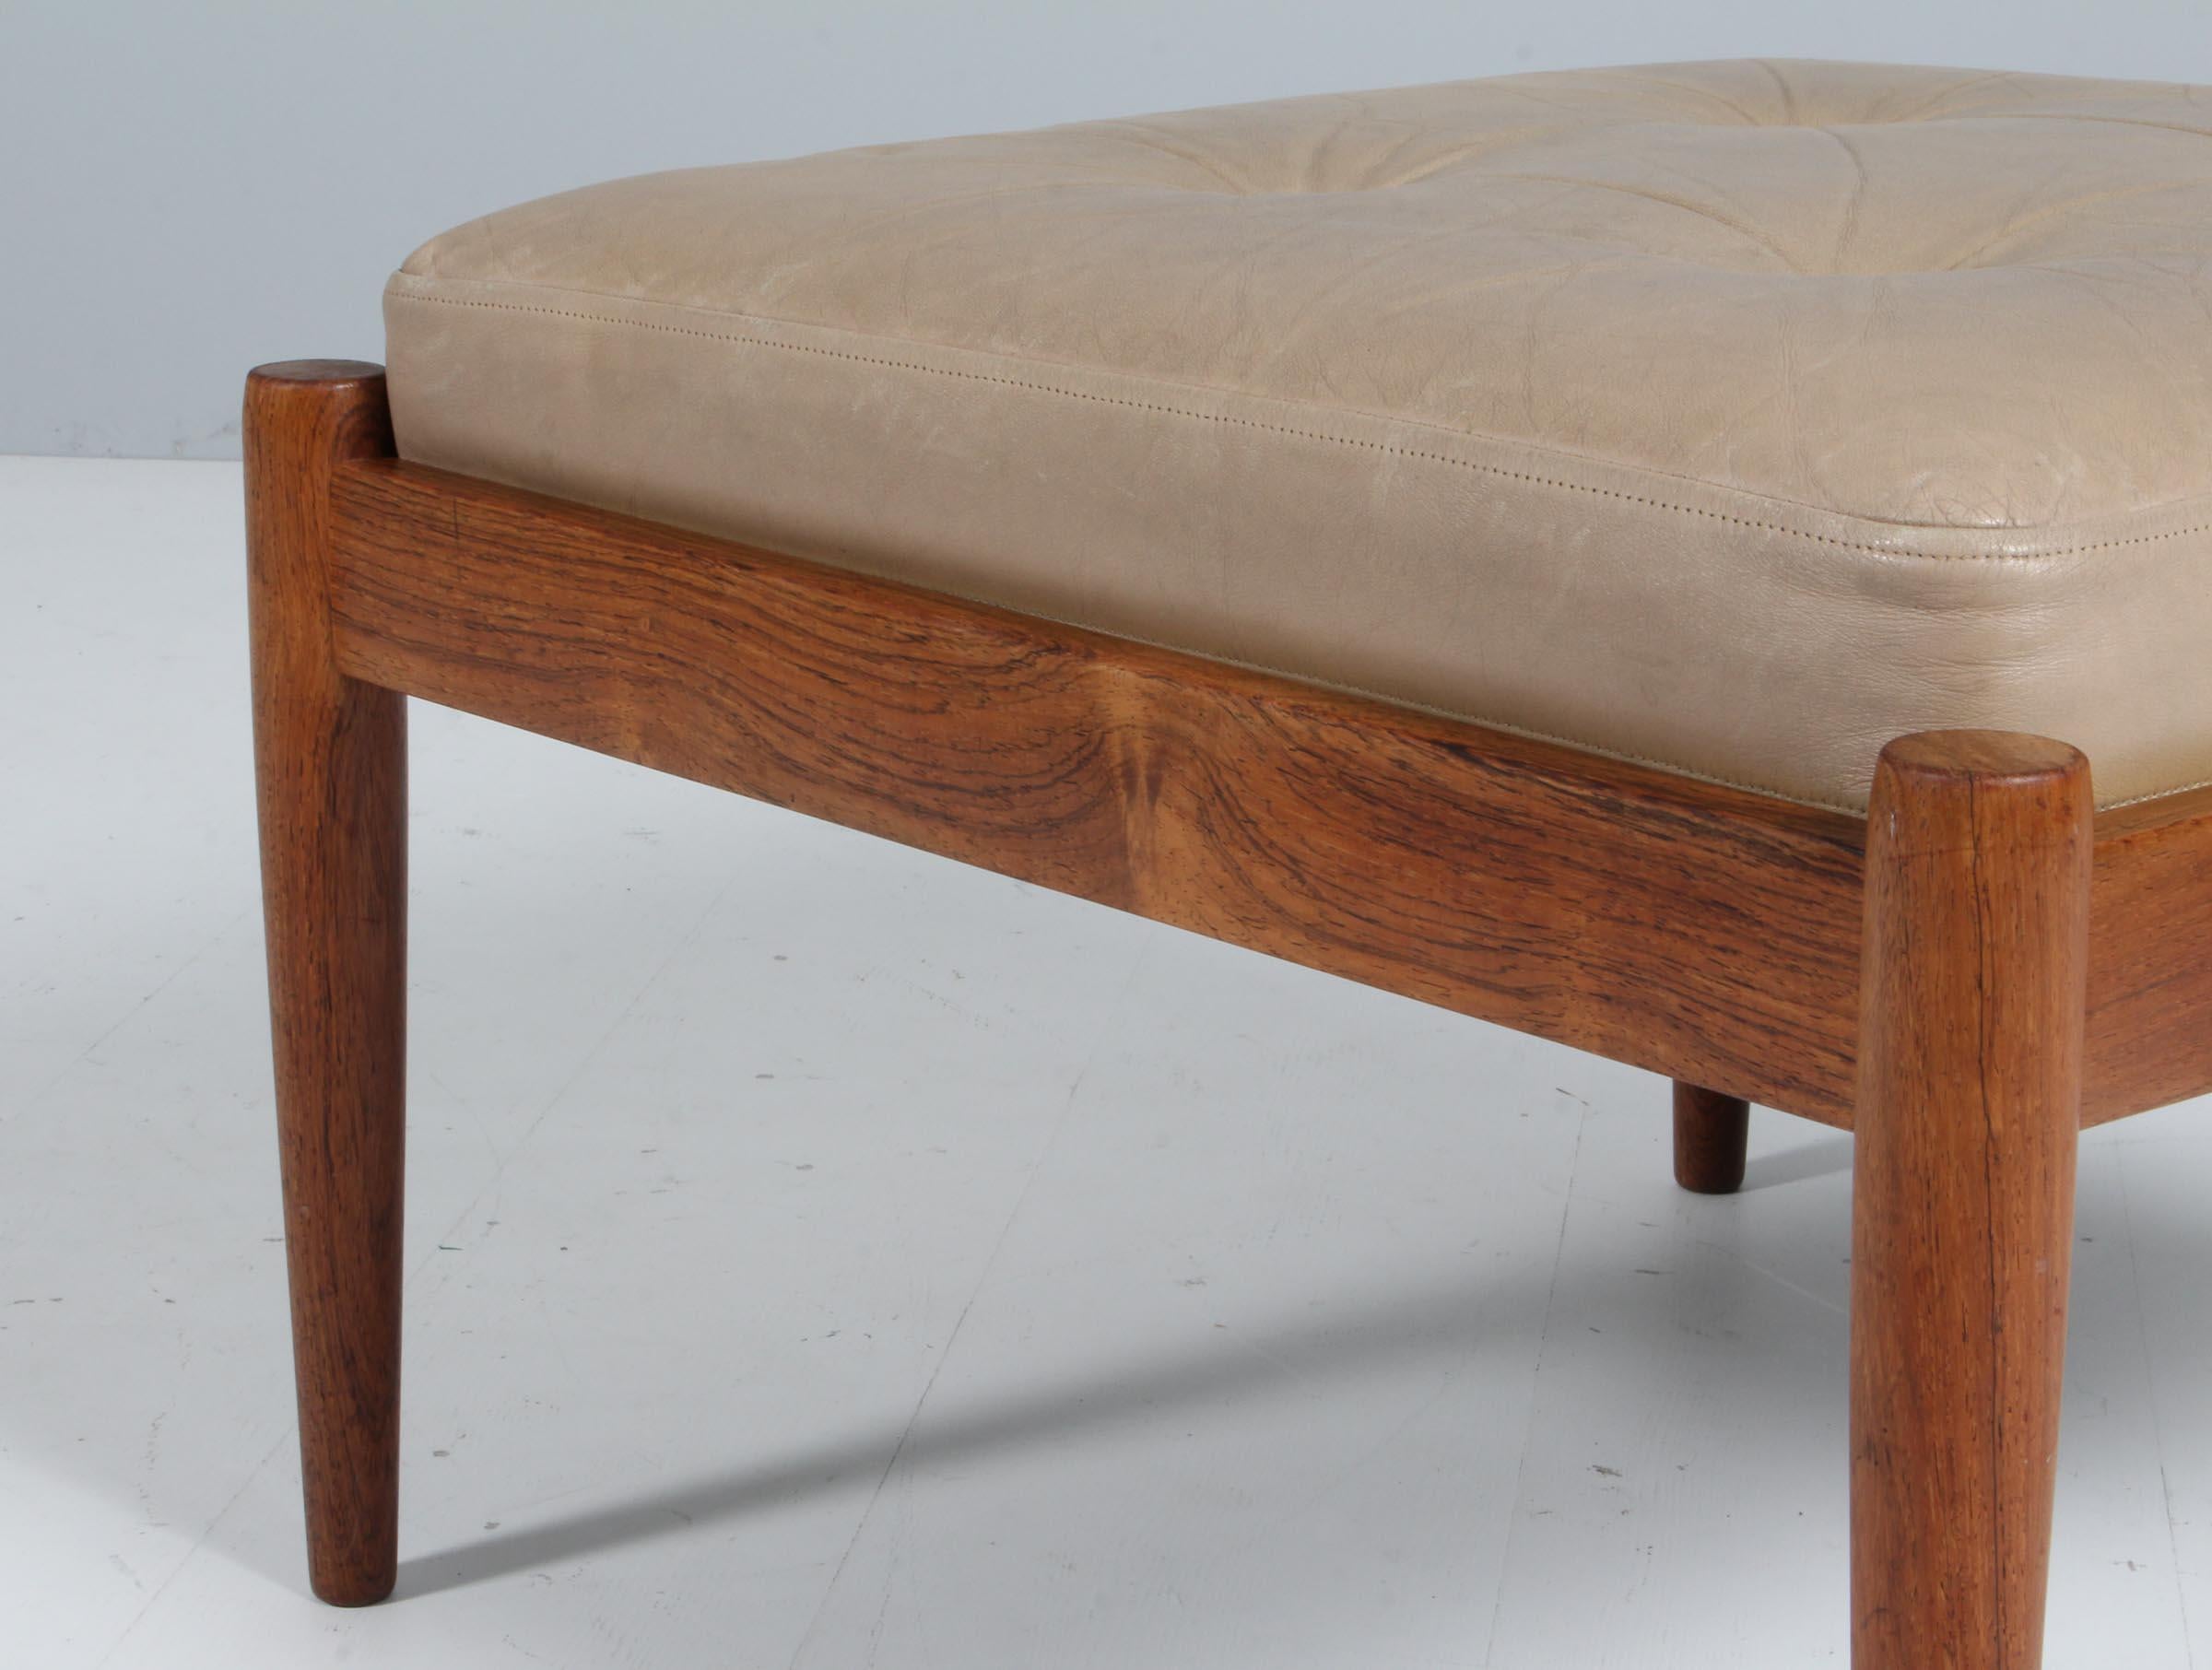 Kai Kristiansen Univers ottoman in leather and rosewood In Good Condition For Sale In Esbjerg, DK